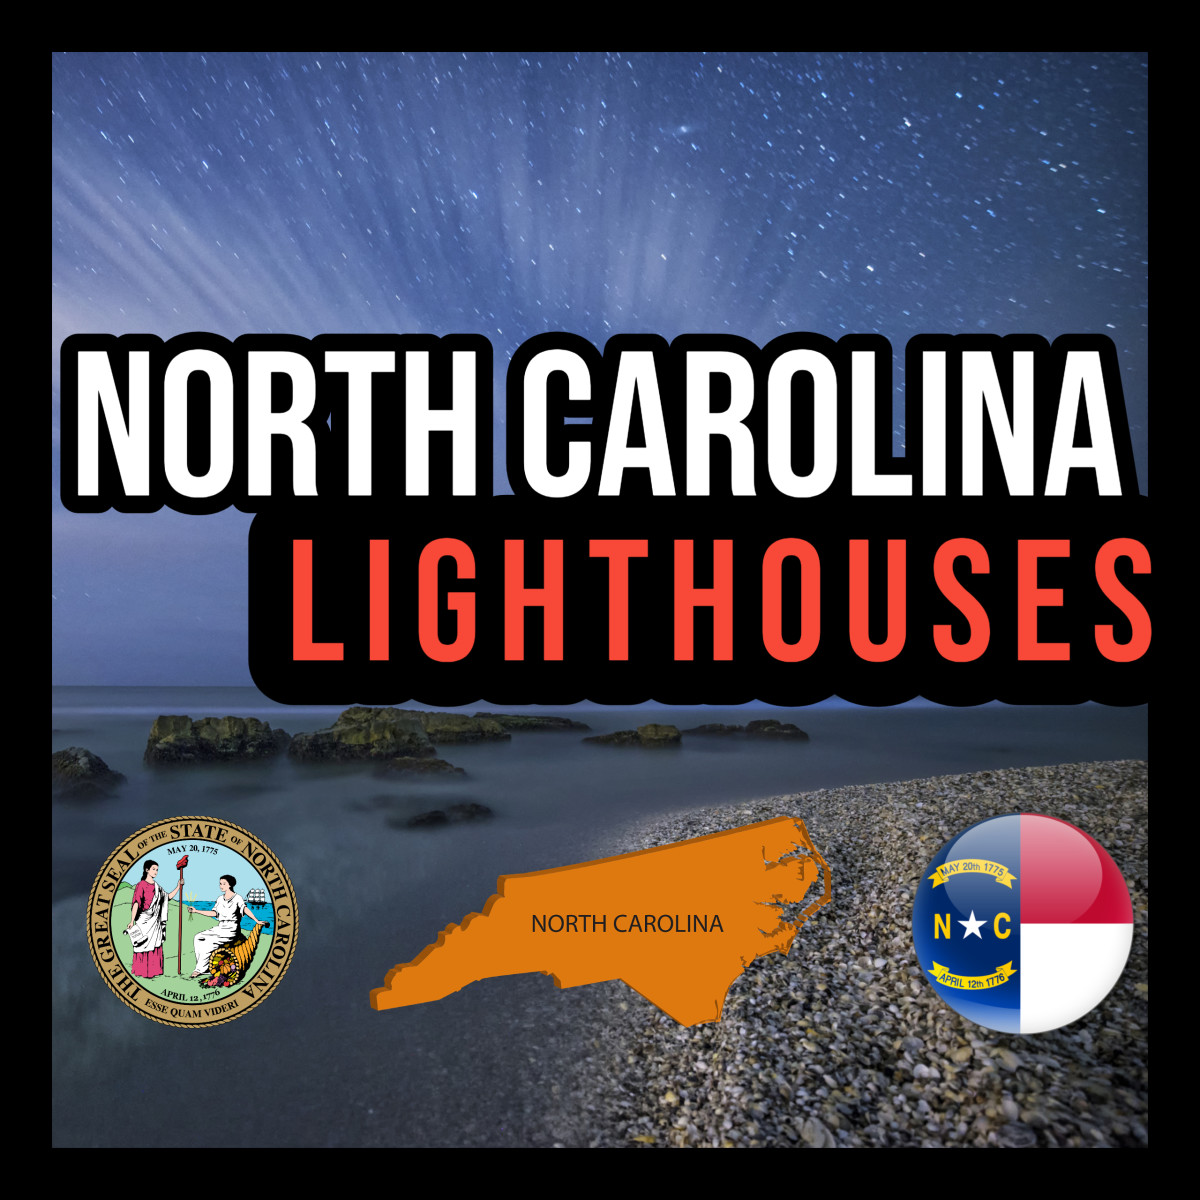 From Cape Hatteras to Cape Lookout, this article provides an overview of North Carolina's numerous lighthouses.